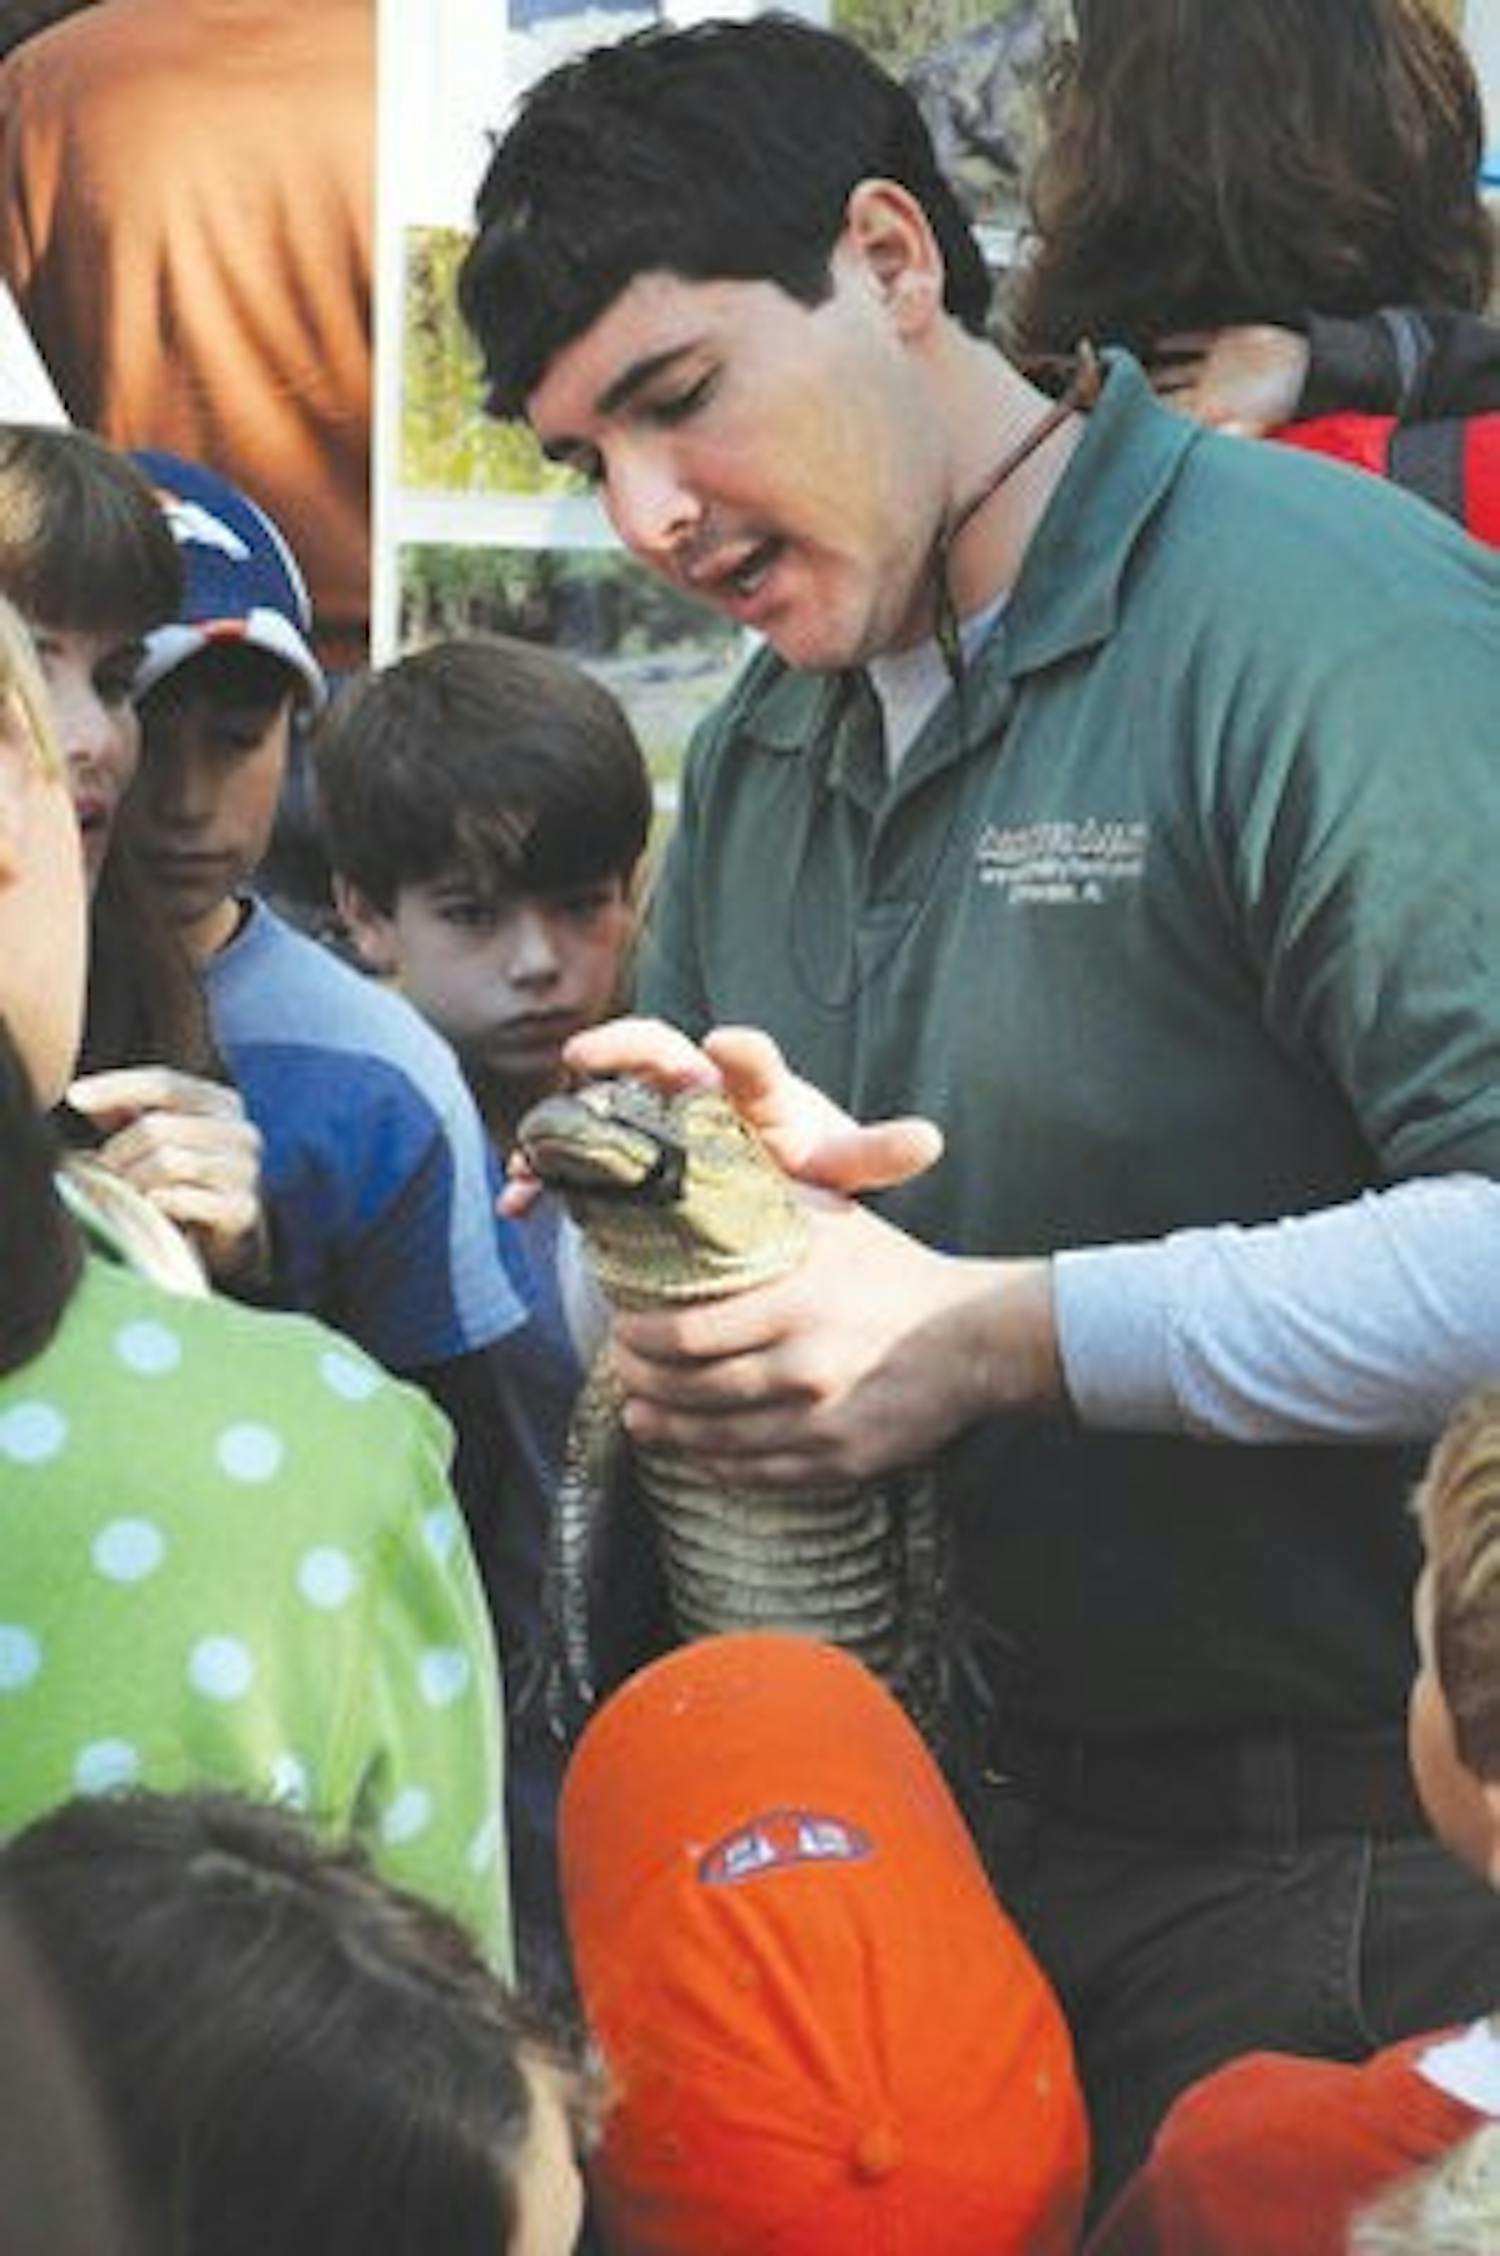 Evan Wheeler from Alligator Alley shows a live alligator to a crowd of children at the Ecology Preserve Oct. 30. (Christen Harned / ASSISTANT PHOTO EDITOR)